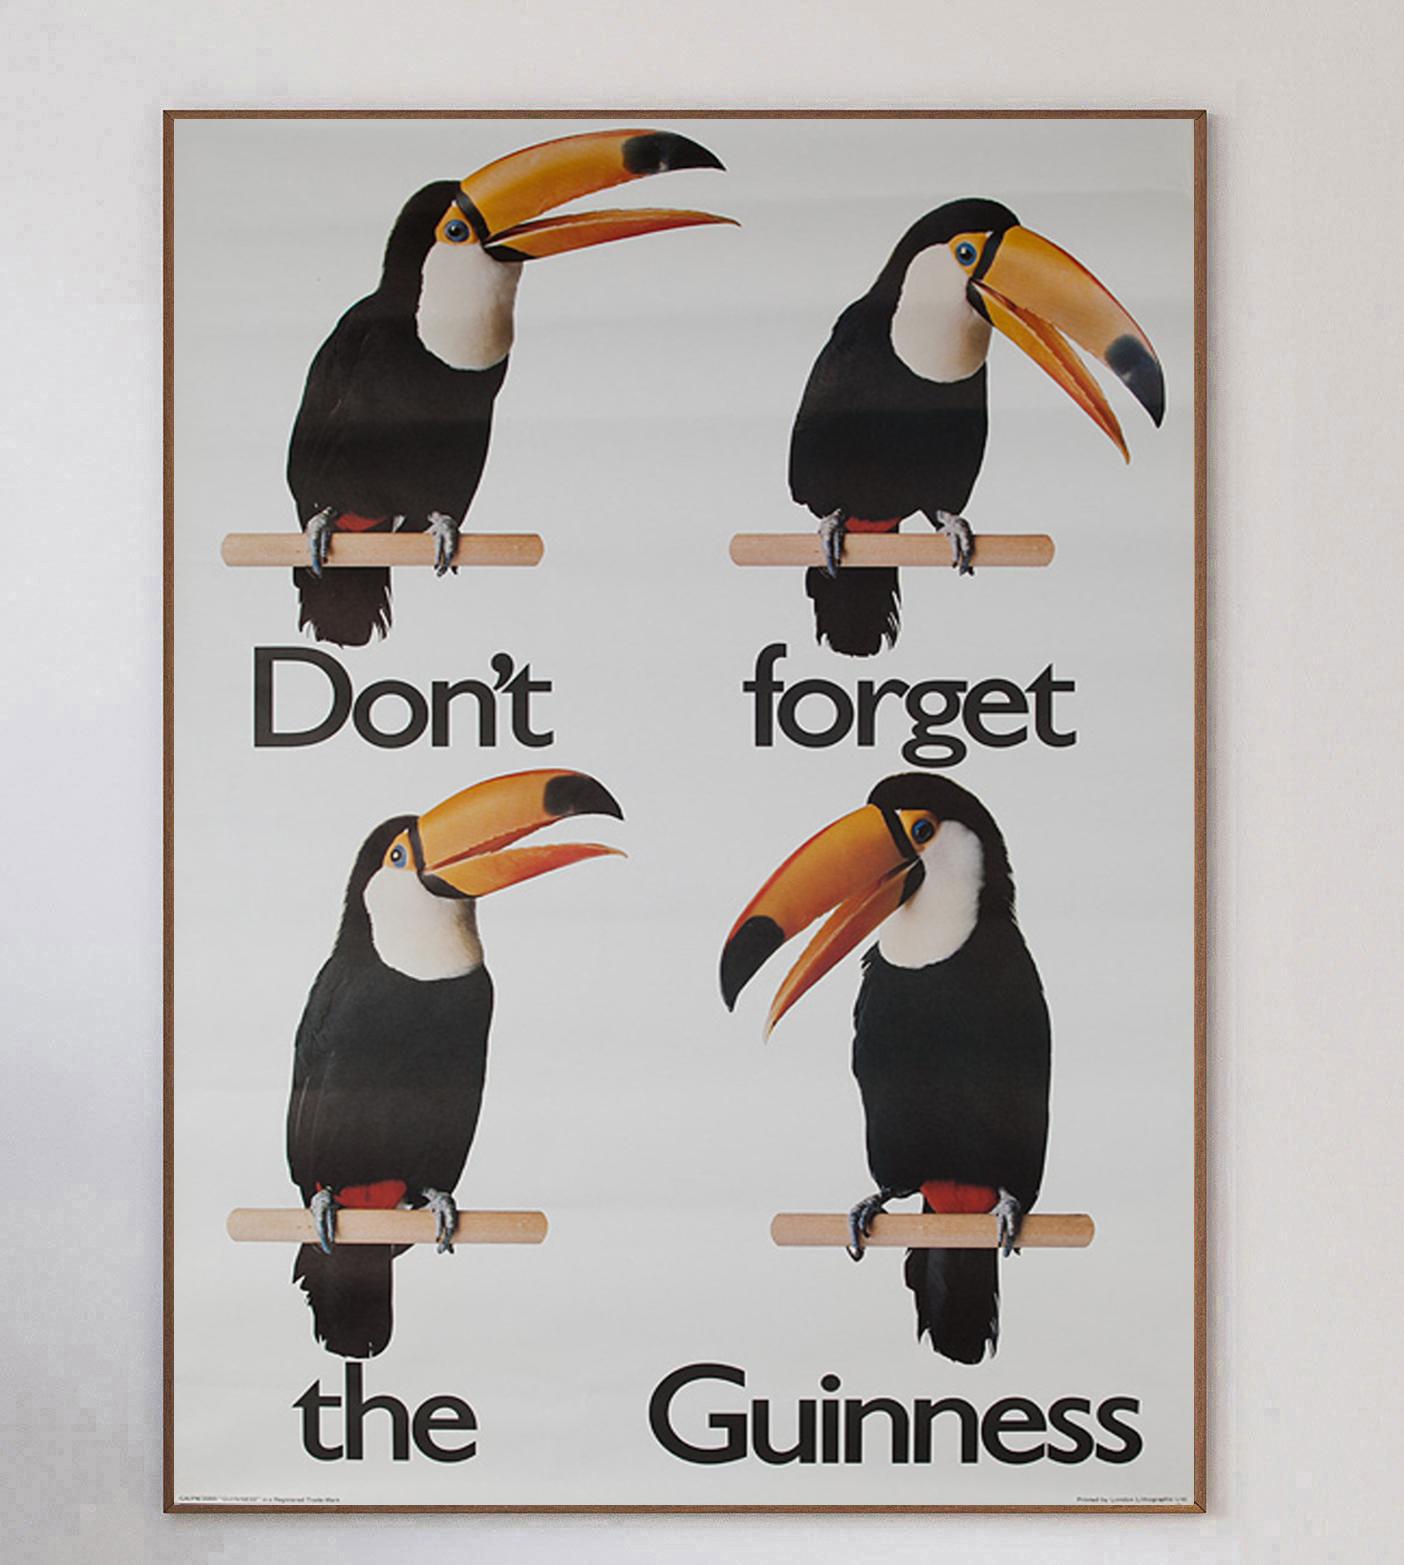 Wonderful & rare poster for Guinness, the Irish stout beer brewery founded in Dublin by Jack Guinness in 1759. One of the largest and most successful alcohol brands in the world, Guinness has a long history of iconic posters & advertisements,